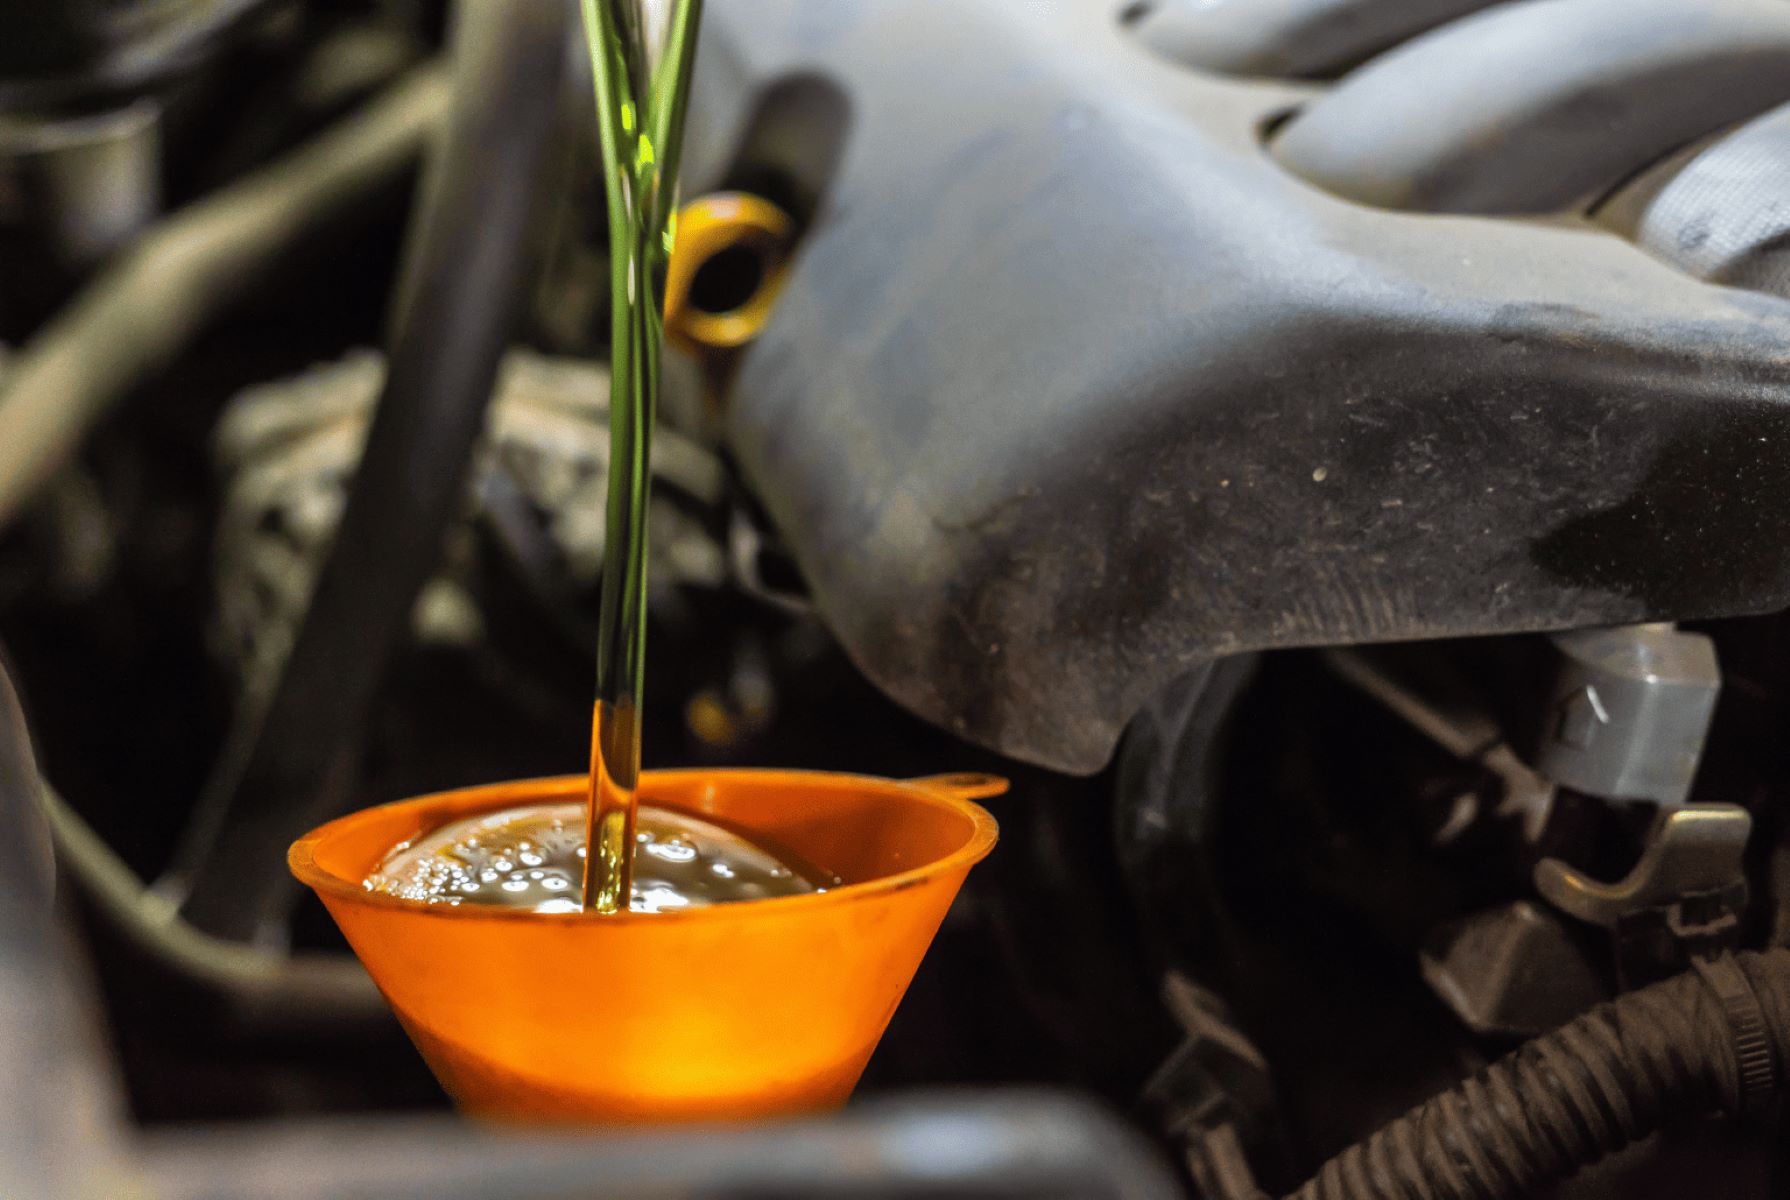 The Surprising Consequences Of Overfilling Manual Transmission Fluid By A Quart